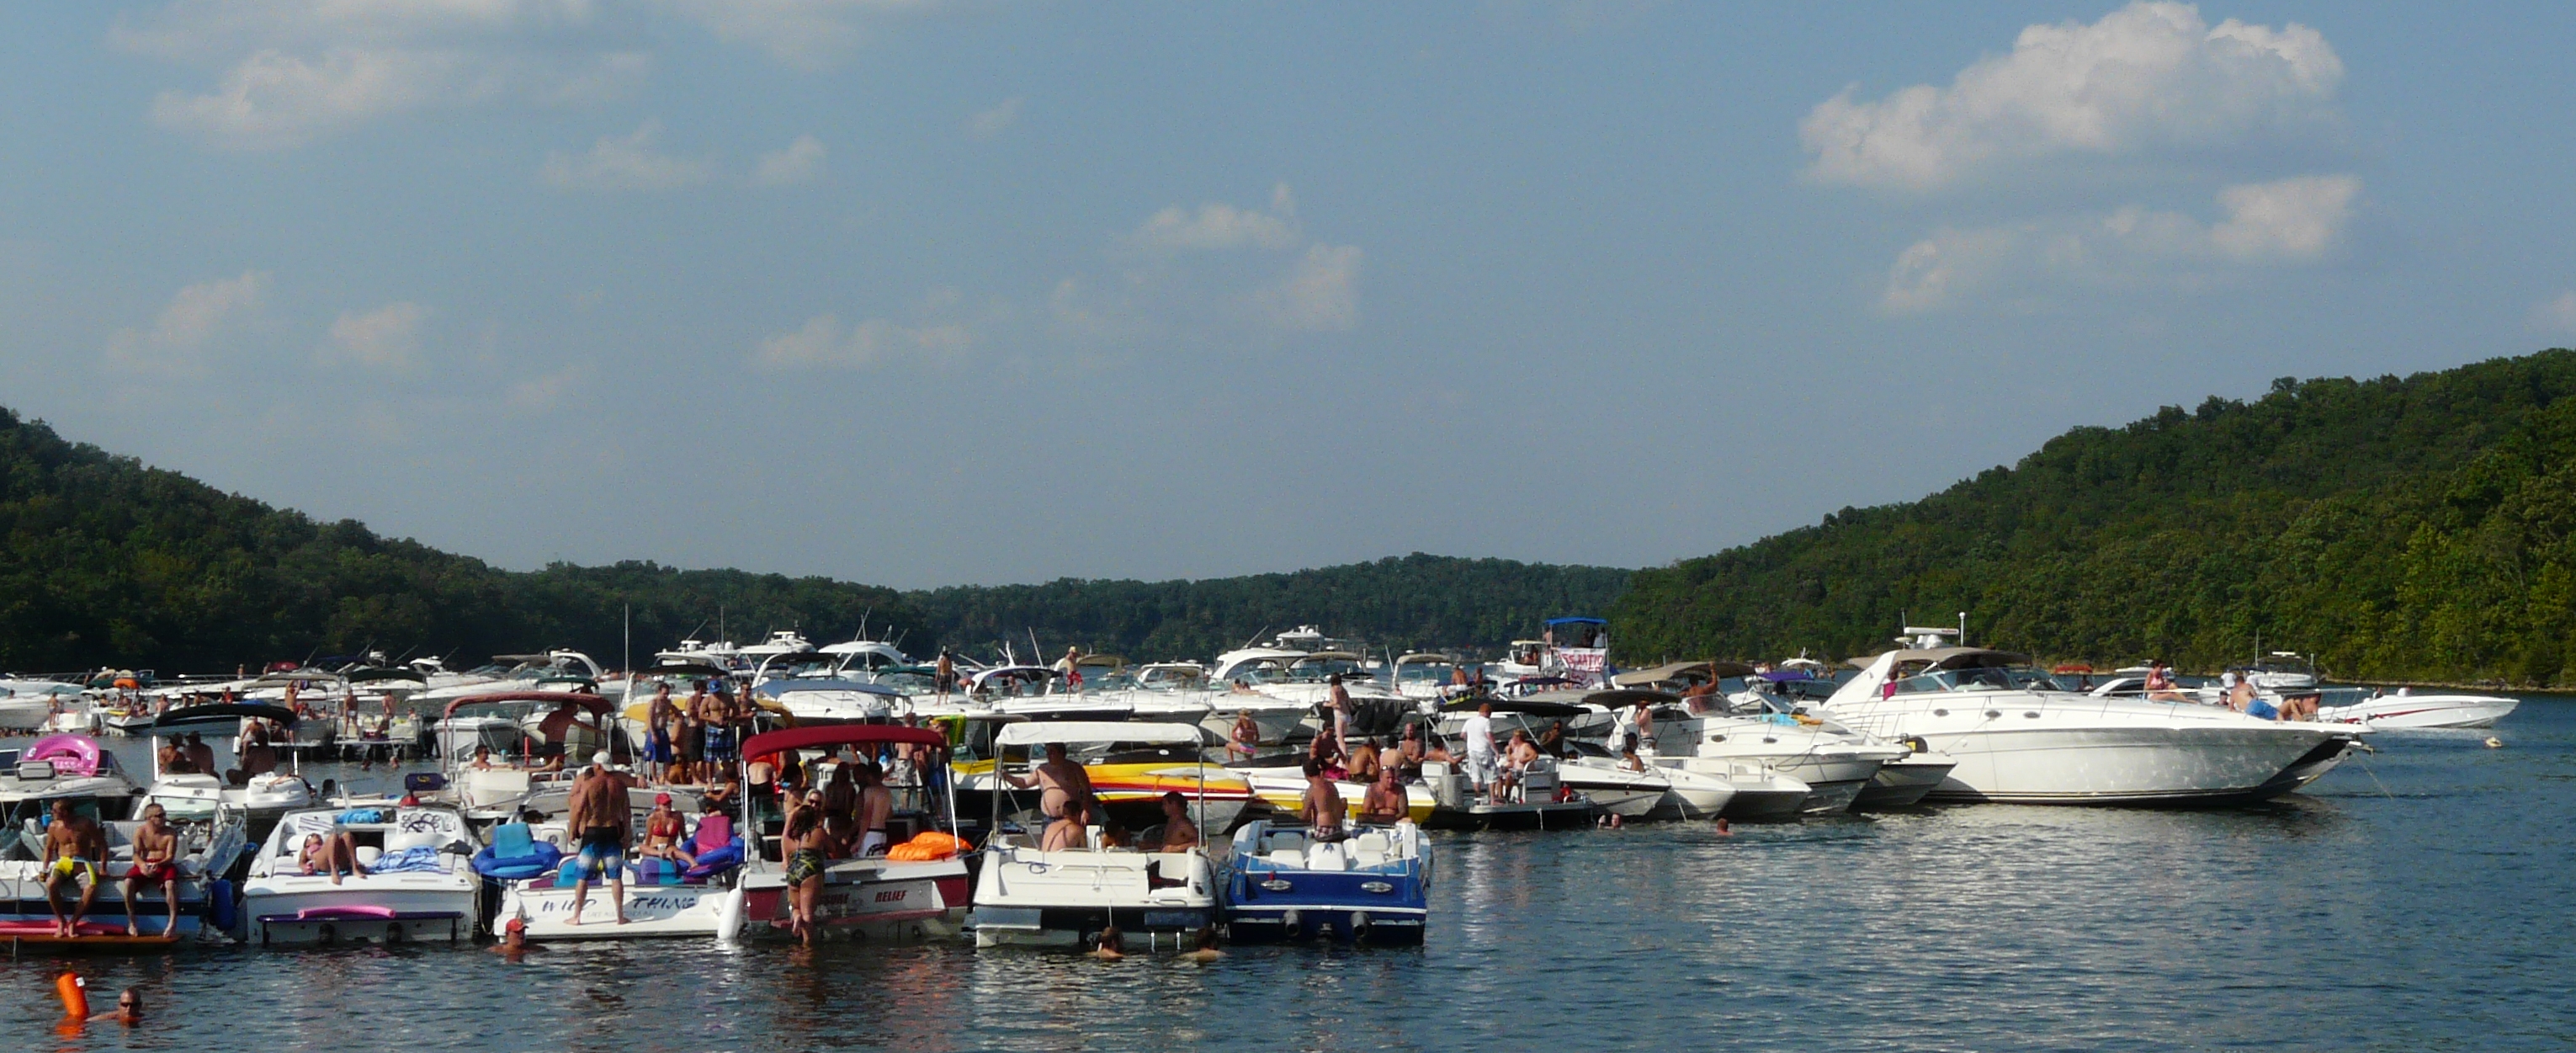 Best of Party cove lake ozark mo